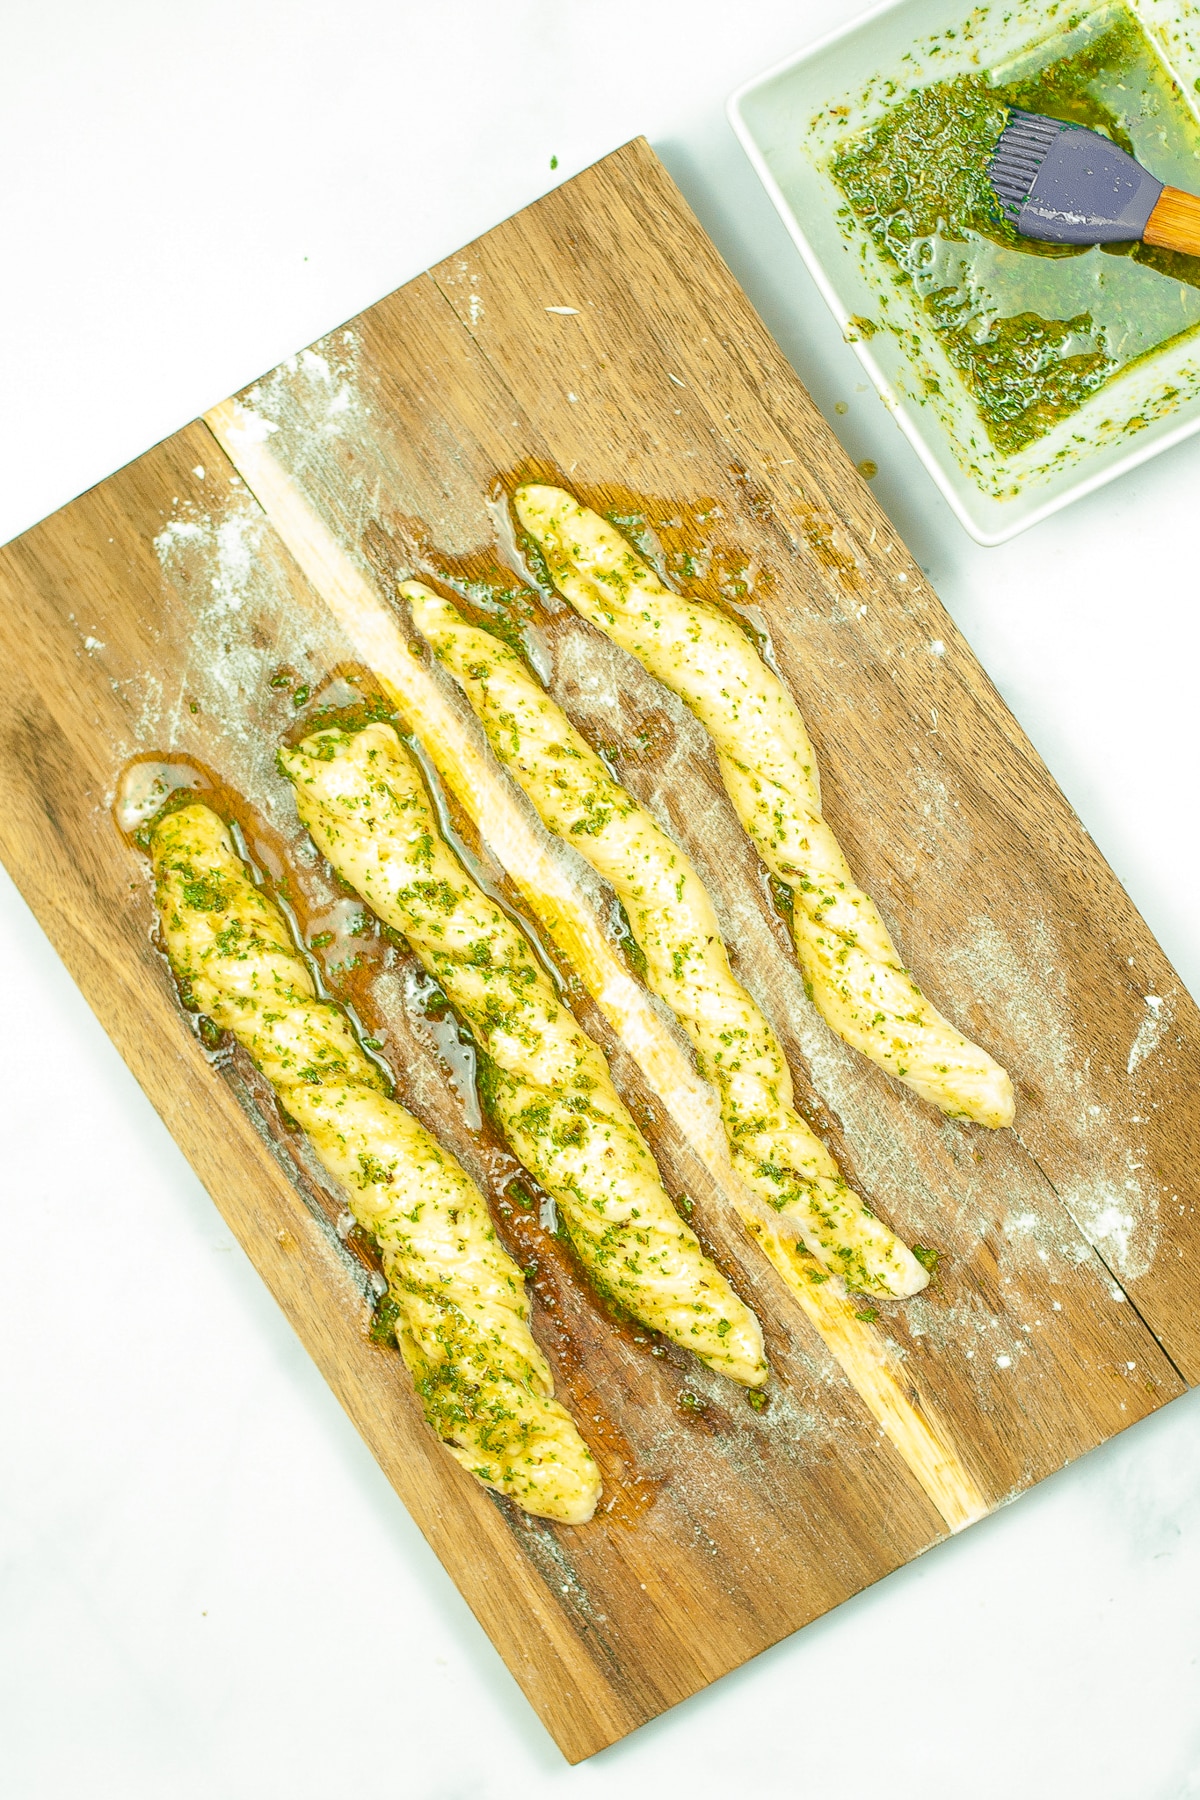 breadstick dough cut on a cutting board coated in butter and herbs with a small bowl nearby on the counter with more melted butter, italian herbs and a silicone brush.